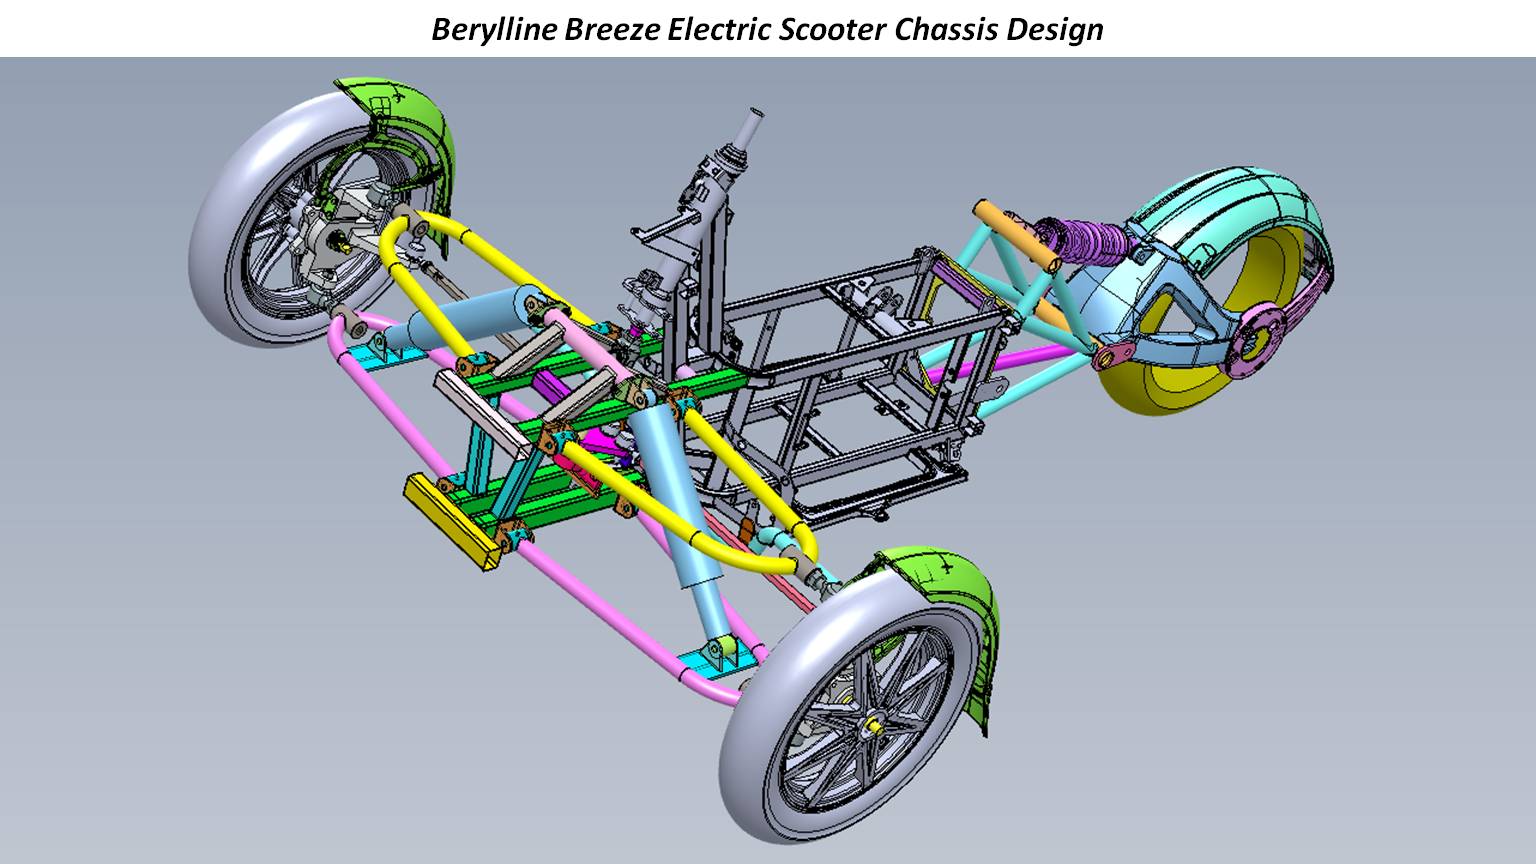 Berylline Breeze Electric Scooter Chassis Design